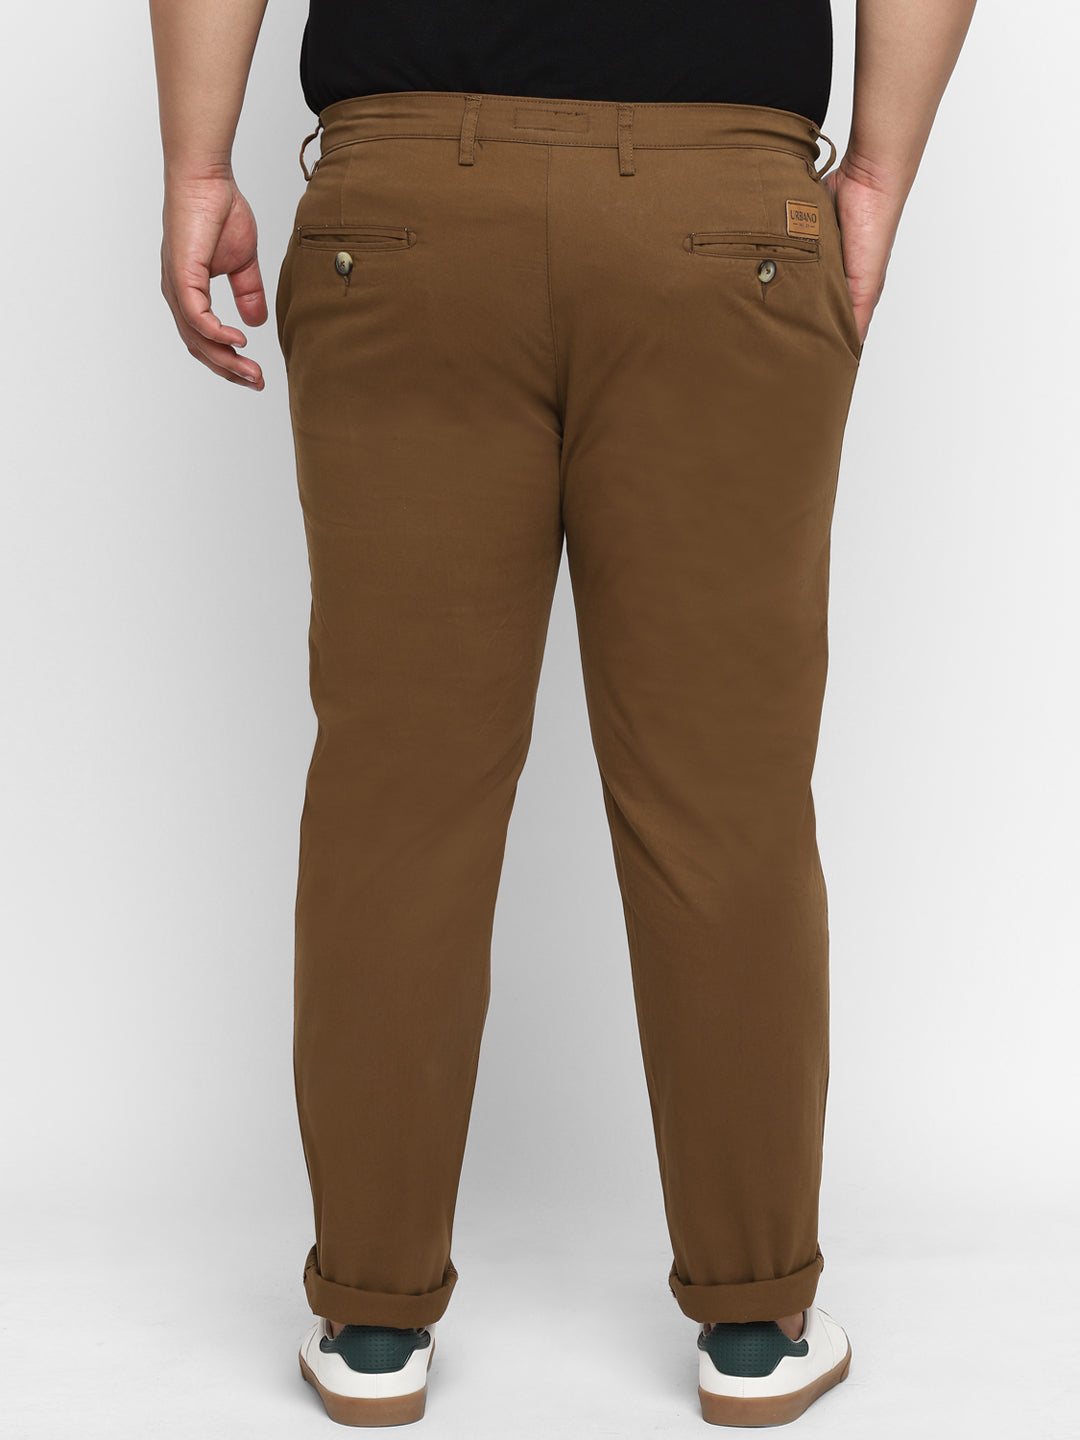 Plus Men's Brown Cotton Regular Fit Casual Chino Pants Stretch